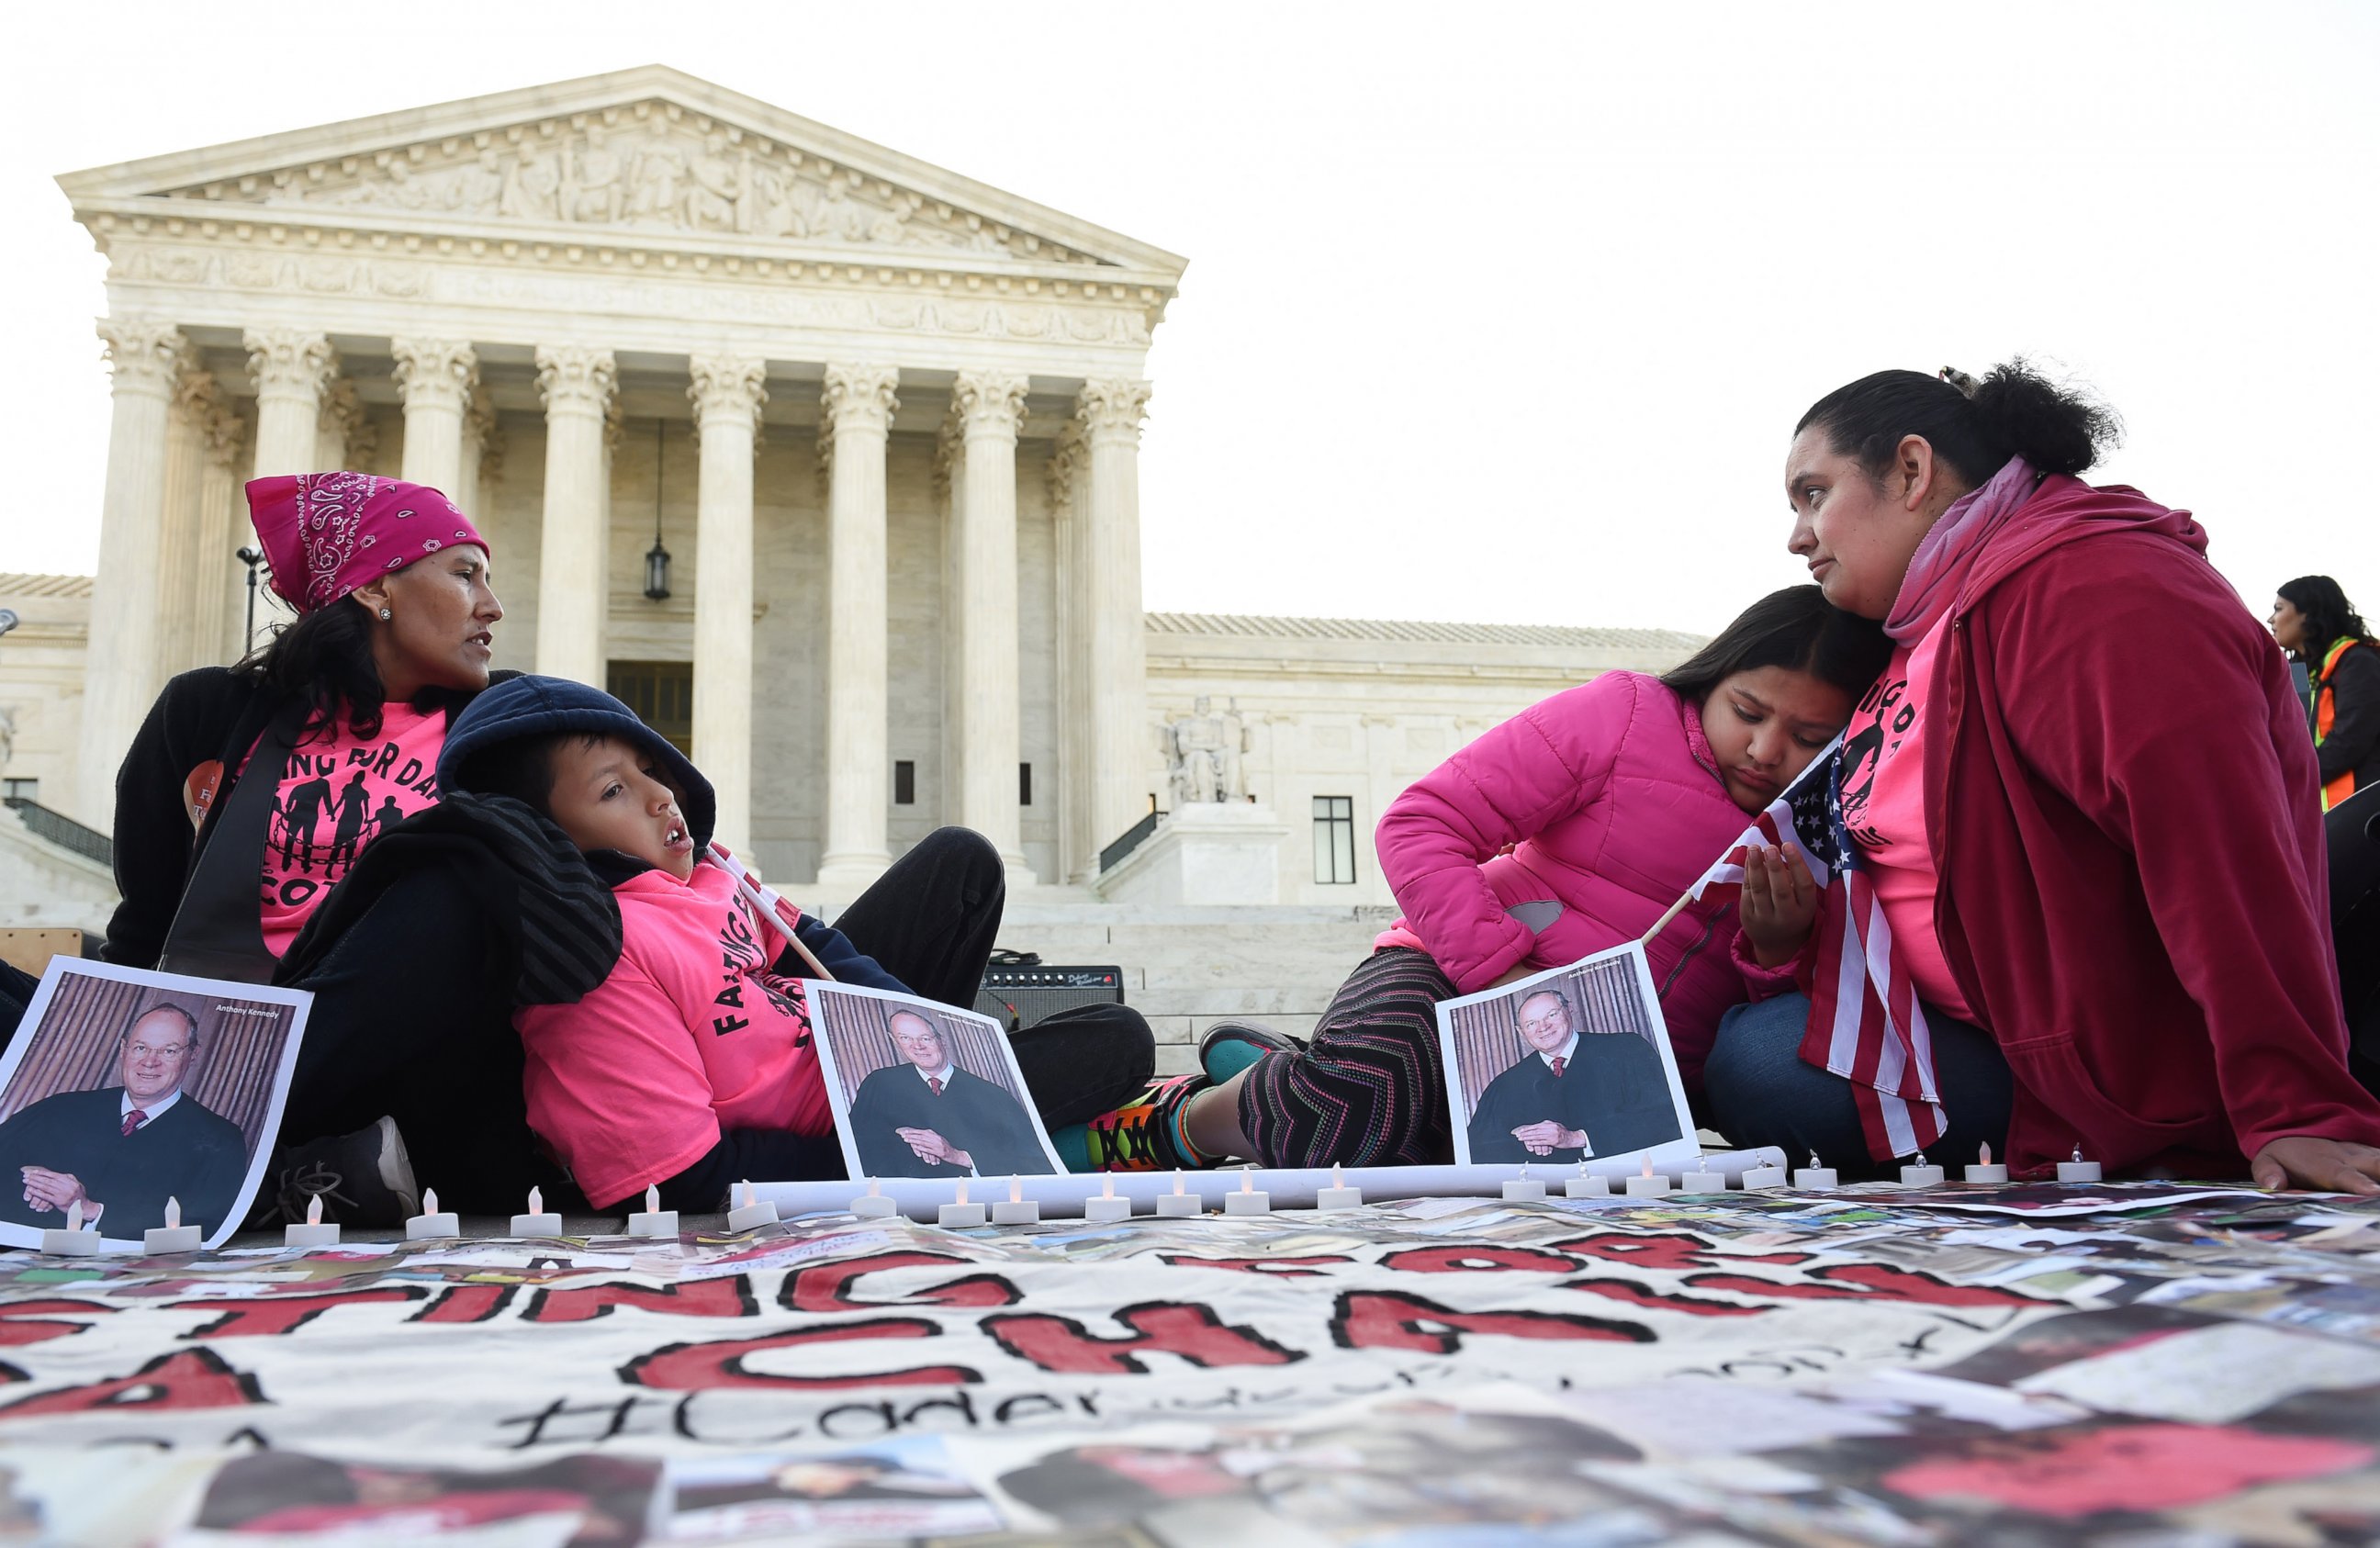 PHOTO: Supporters of DACA/DAPA outside the Supreme Court, April 18, 2016 in Washington, DC. They and others were there to show support of Obama's immigration policy as the court heard a case that focuses on the President's executive action on immigration.